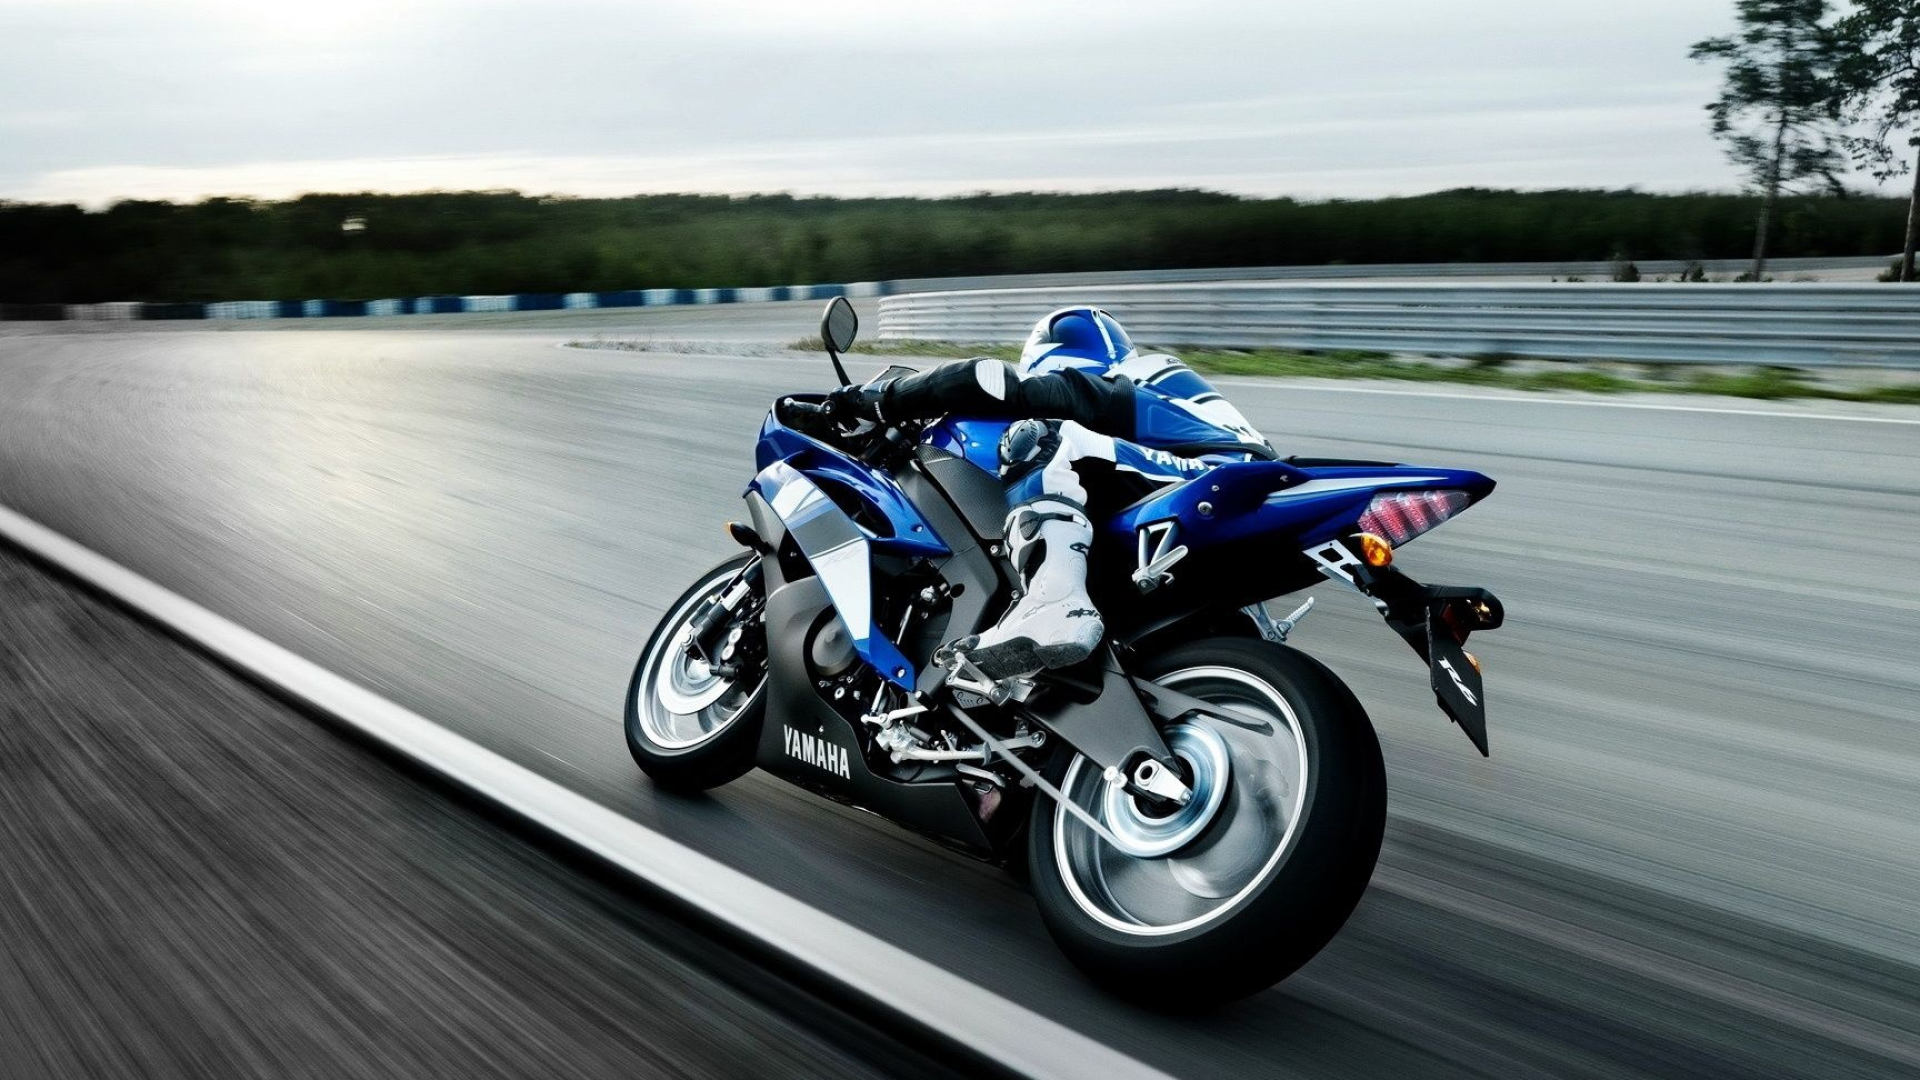 Street Bike, Yamaha motorcycle wallpapers, Speed and style, Iconic rides, 1920x1080 Full HD Desktop